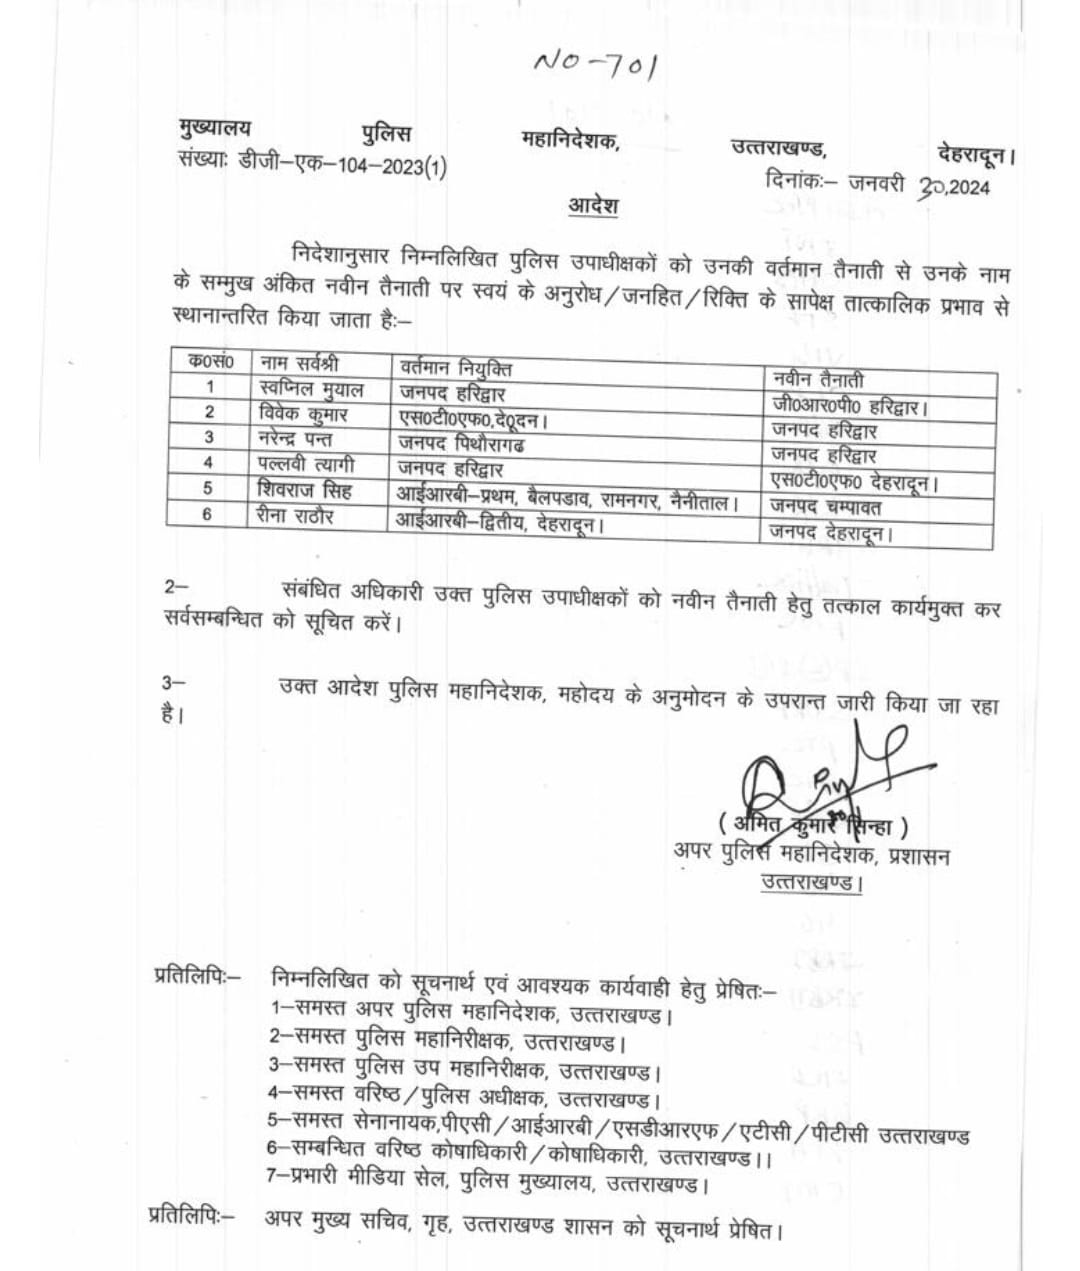 Transfer of Deputy Superintendents of Police